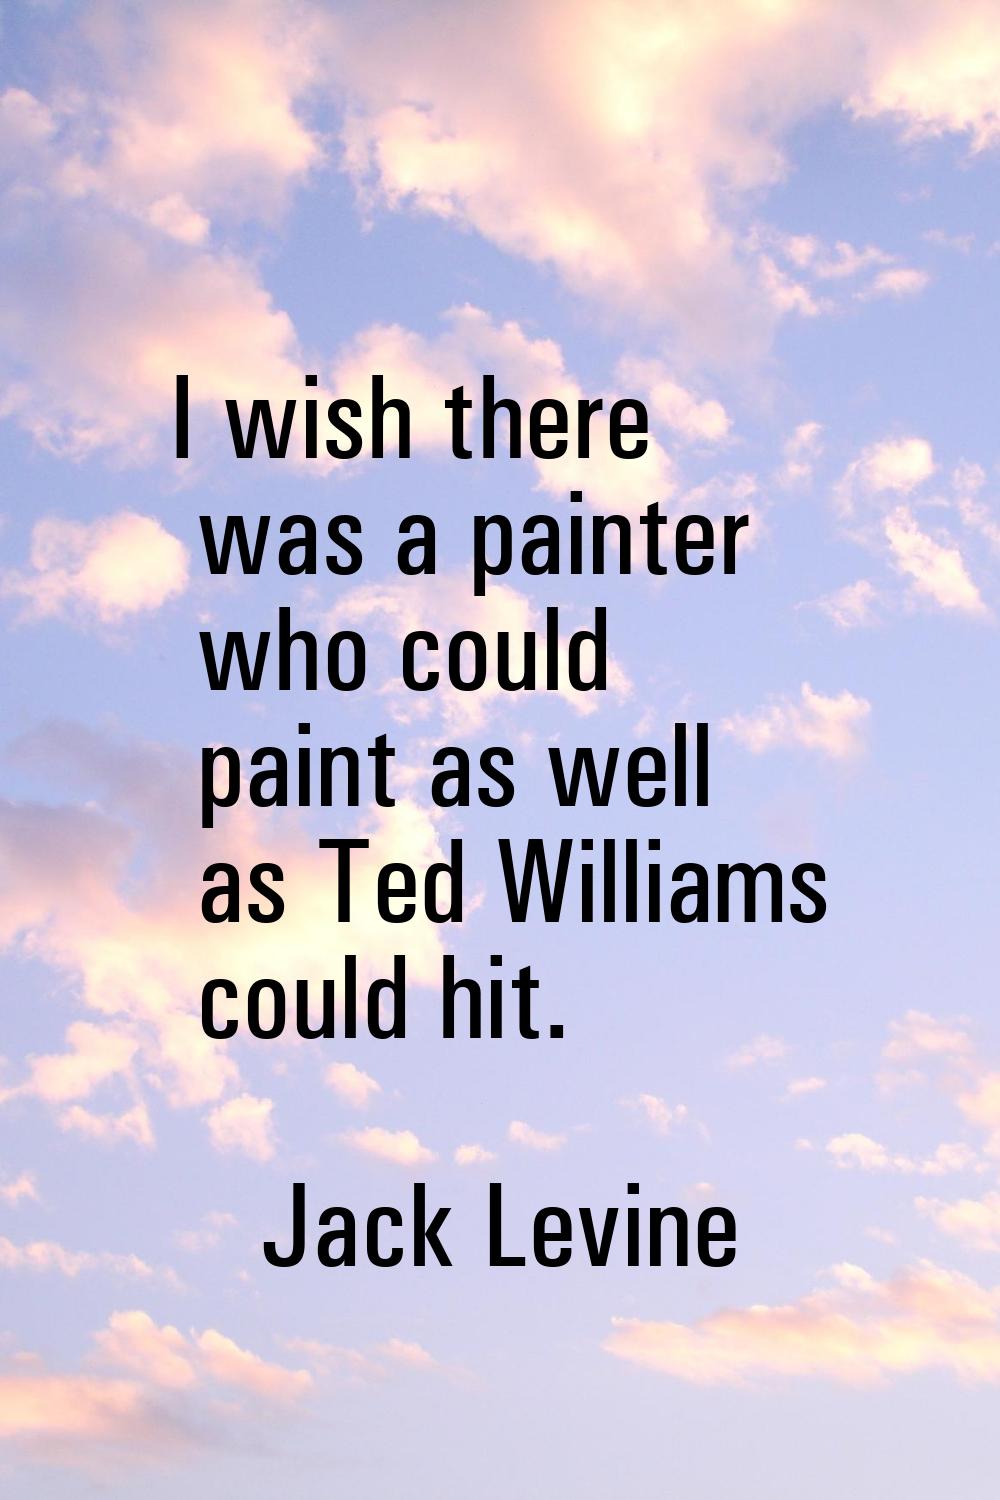 I wish there was a painter who could paint as well as Ted Williams could hit.